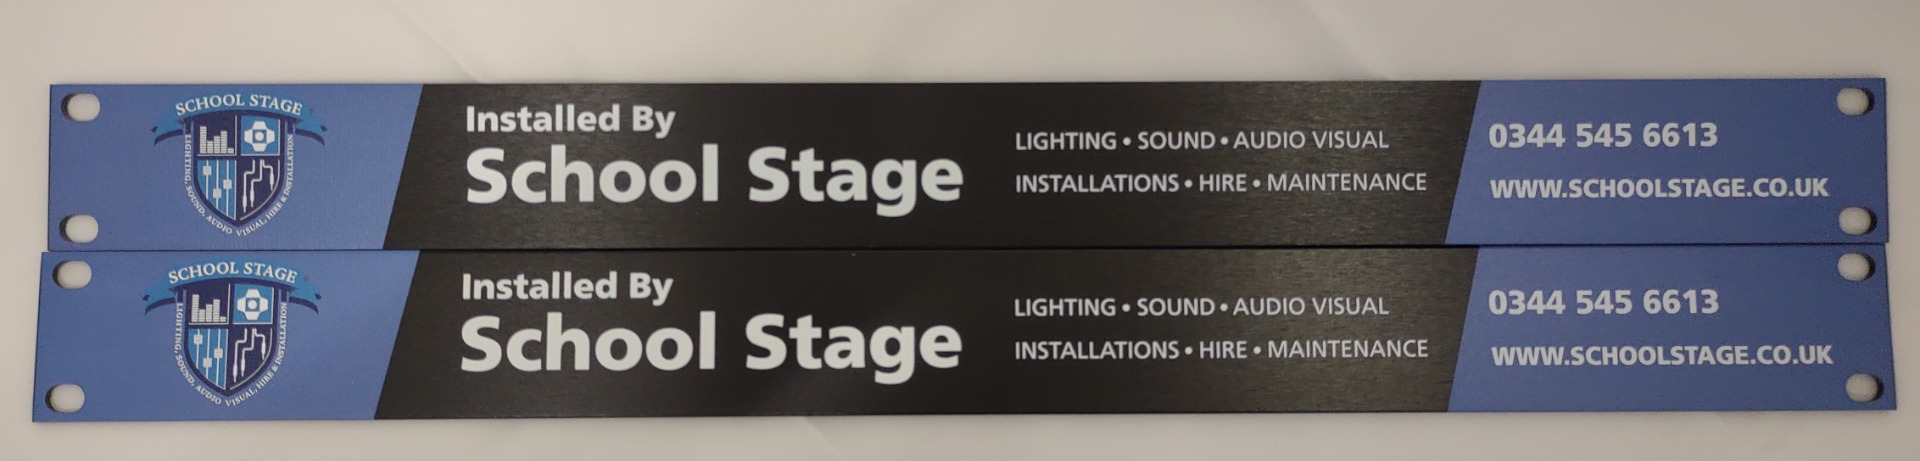 Customer / Product Focus - Blanking Panels for School Stage